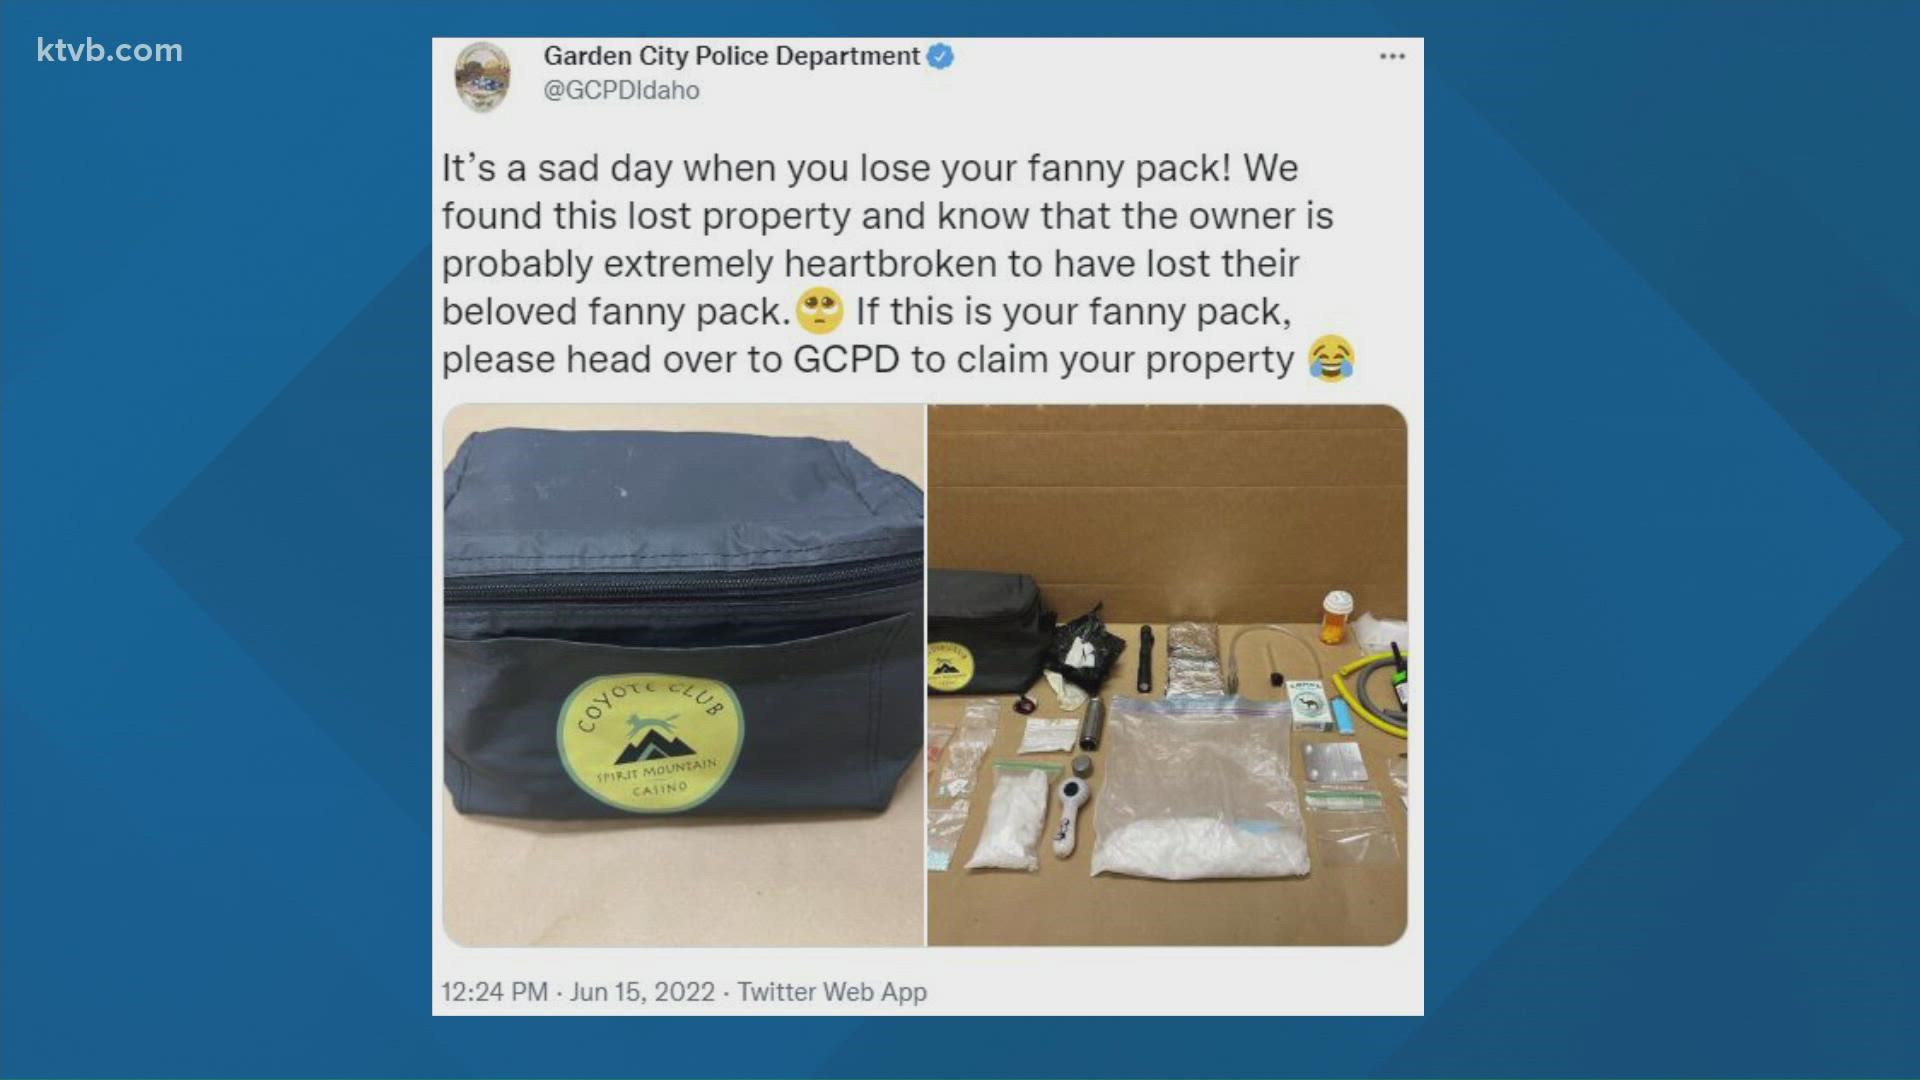 Police said someone found the fanny pack in a common area of an apartment complex and turned it in.